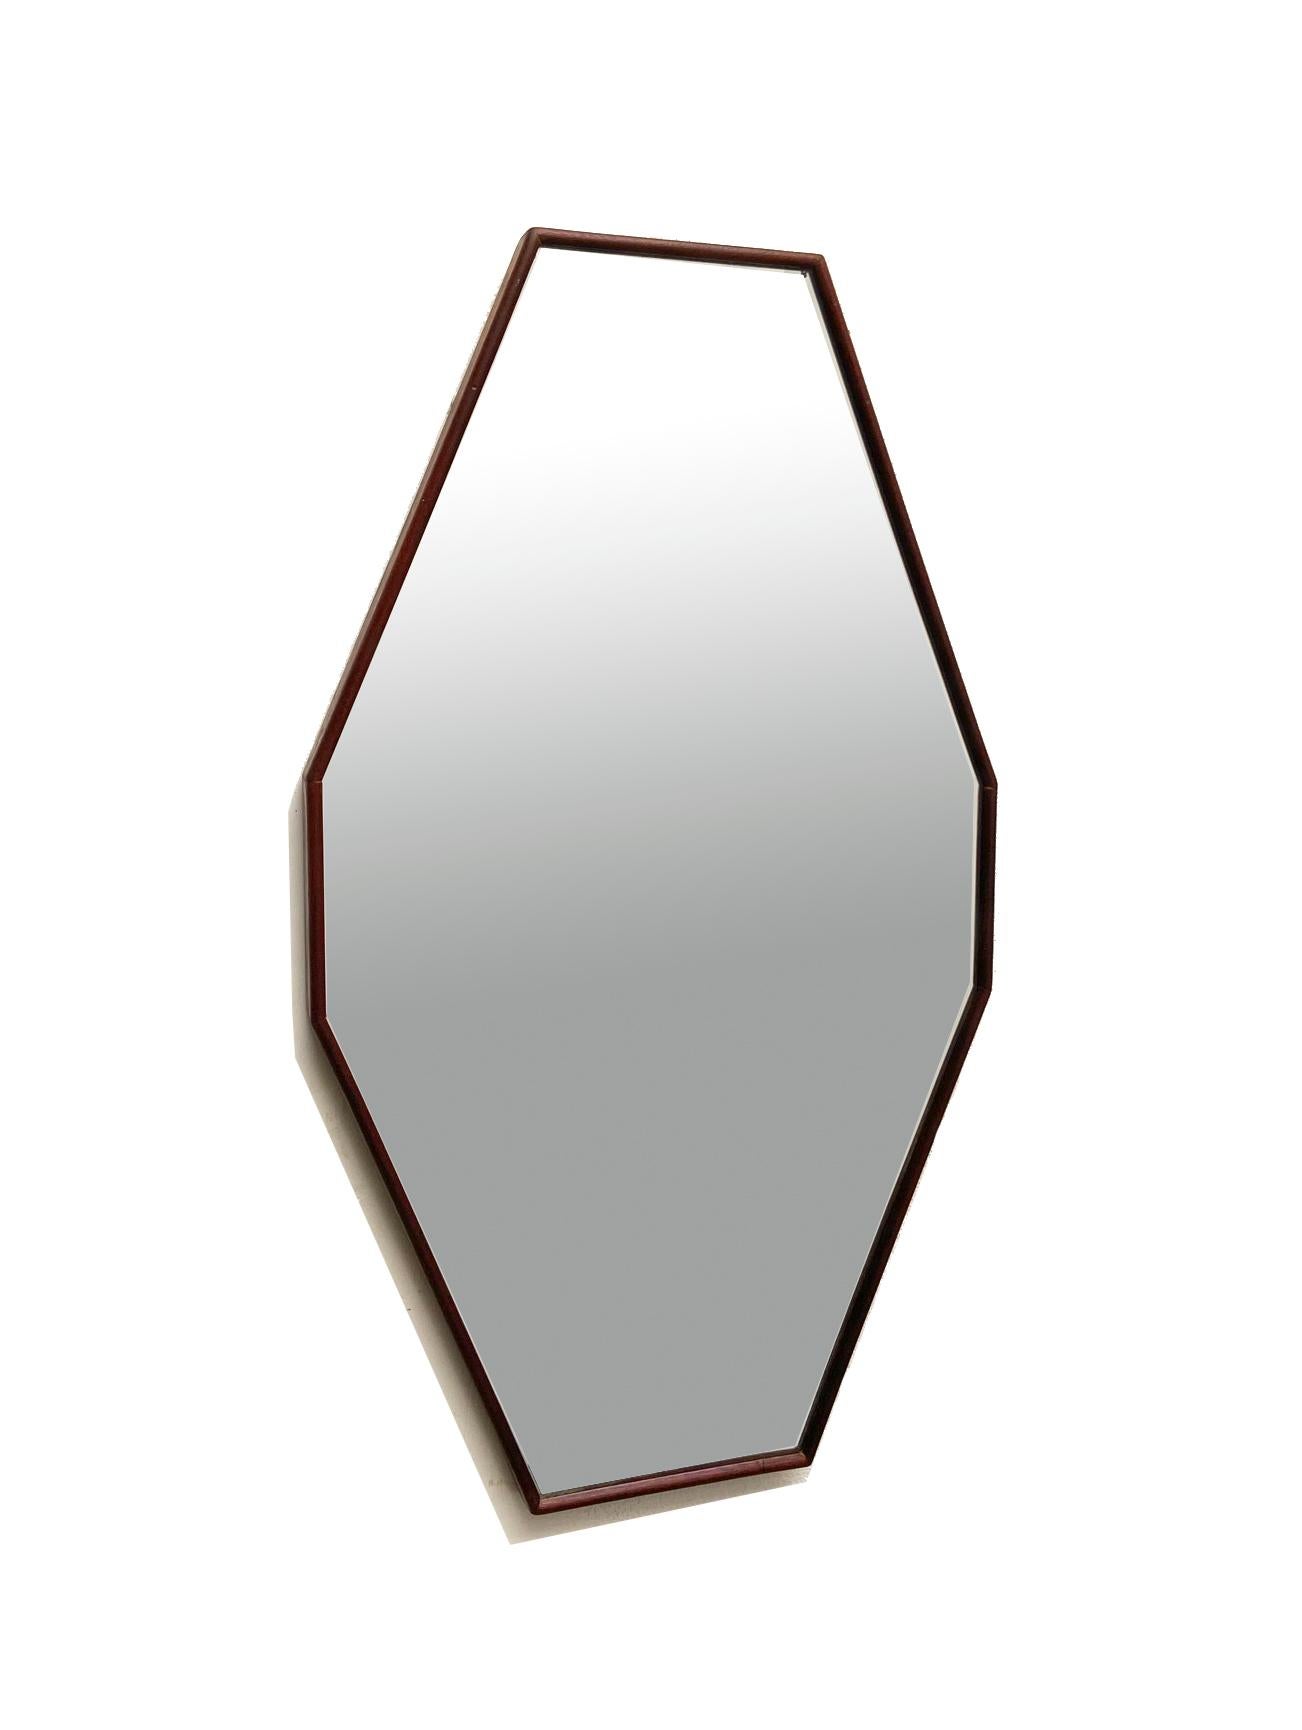 Italian mirror from the 1960s, with an elongated octagonal shape. 
Teak frame, original silver mirror. 
Very good condition. Natural signs of aging.